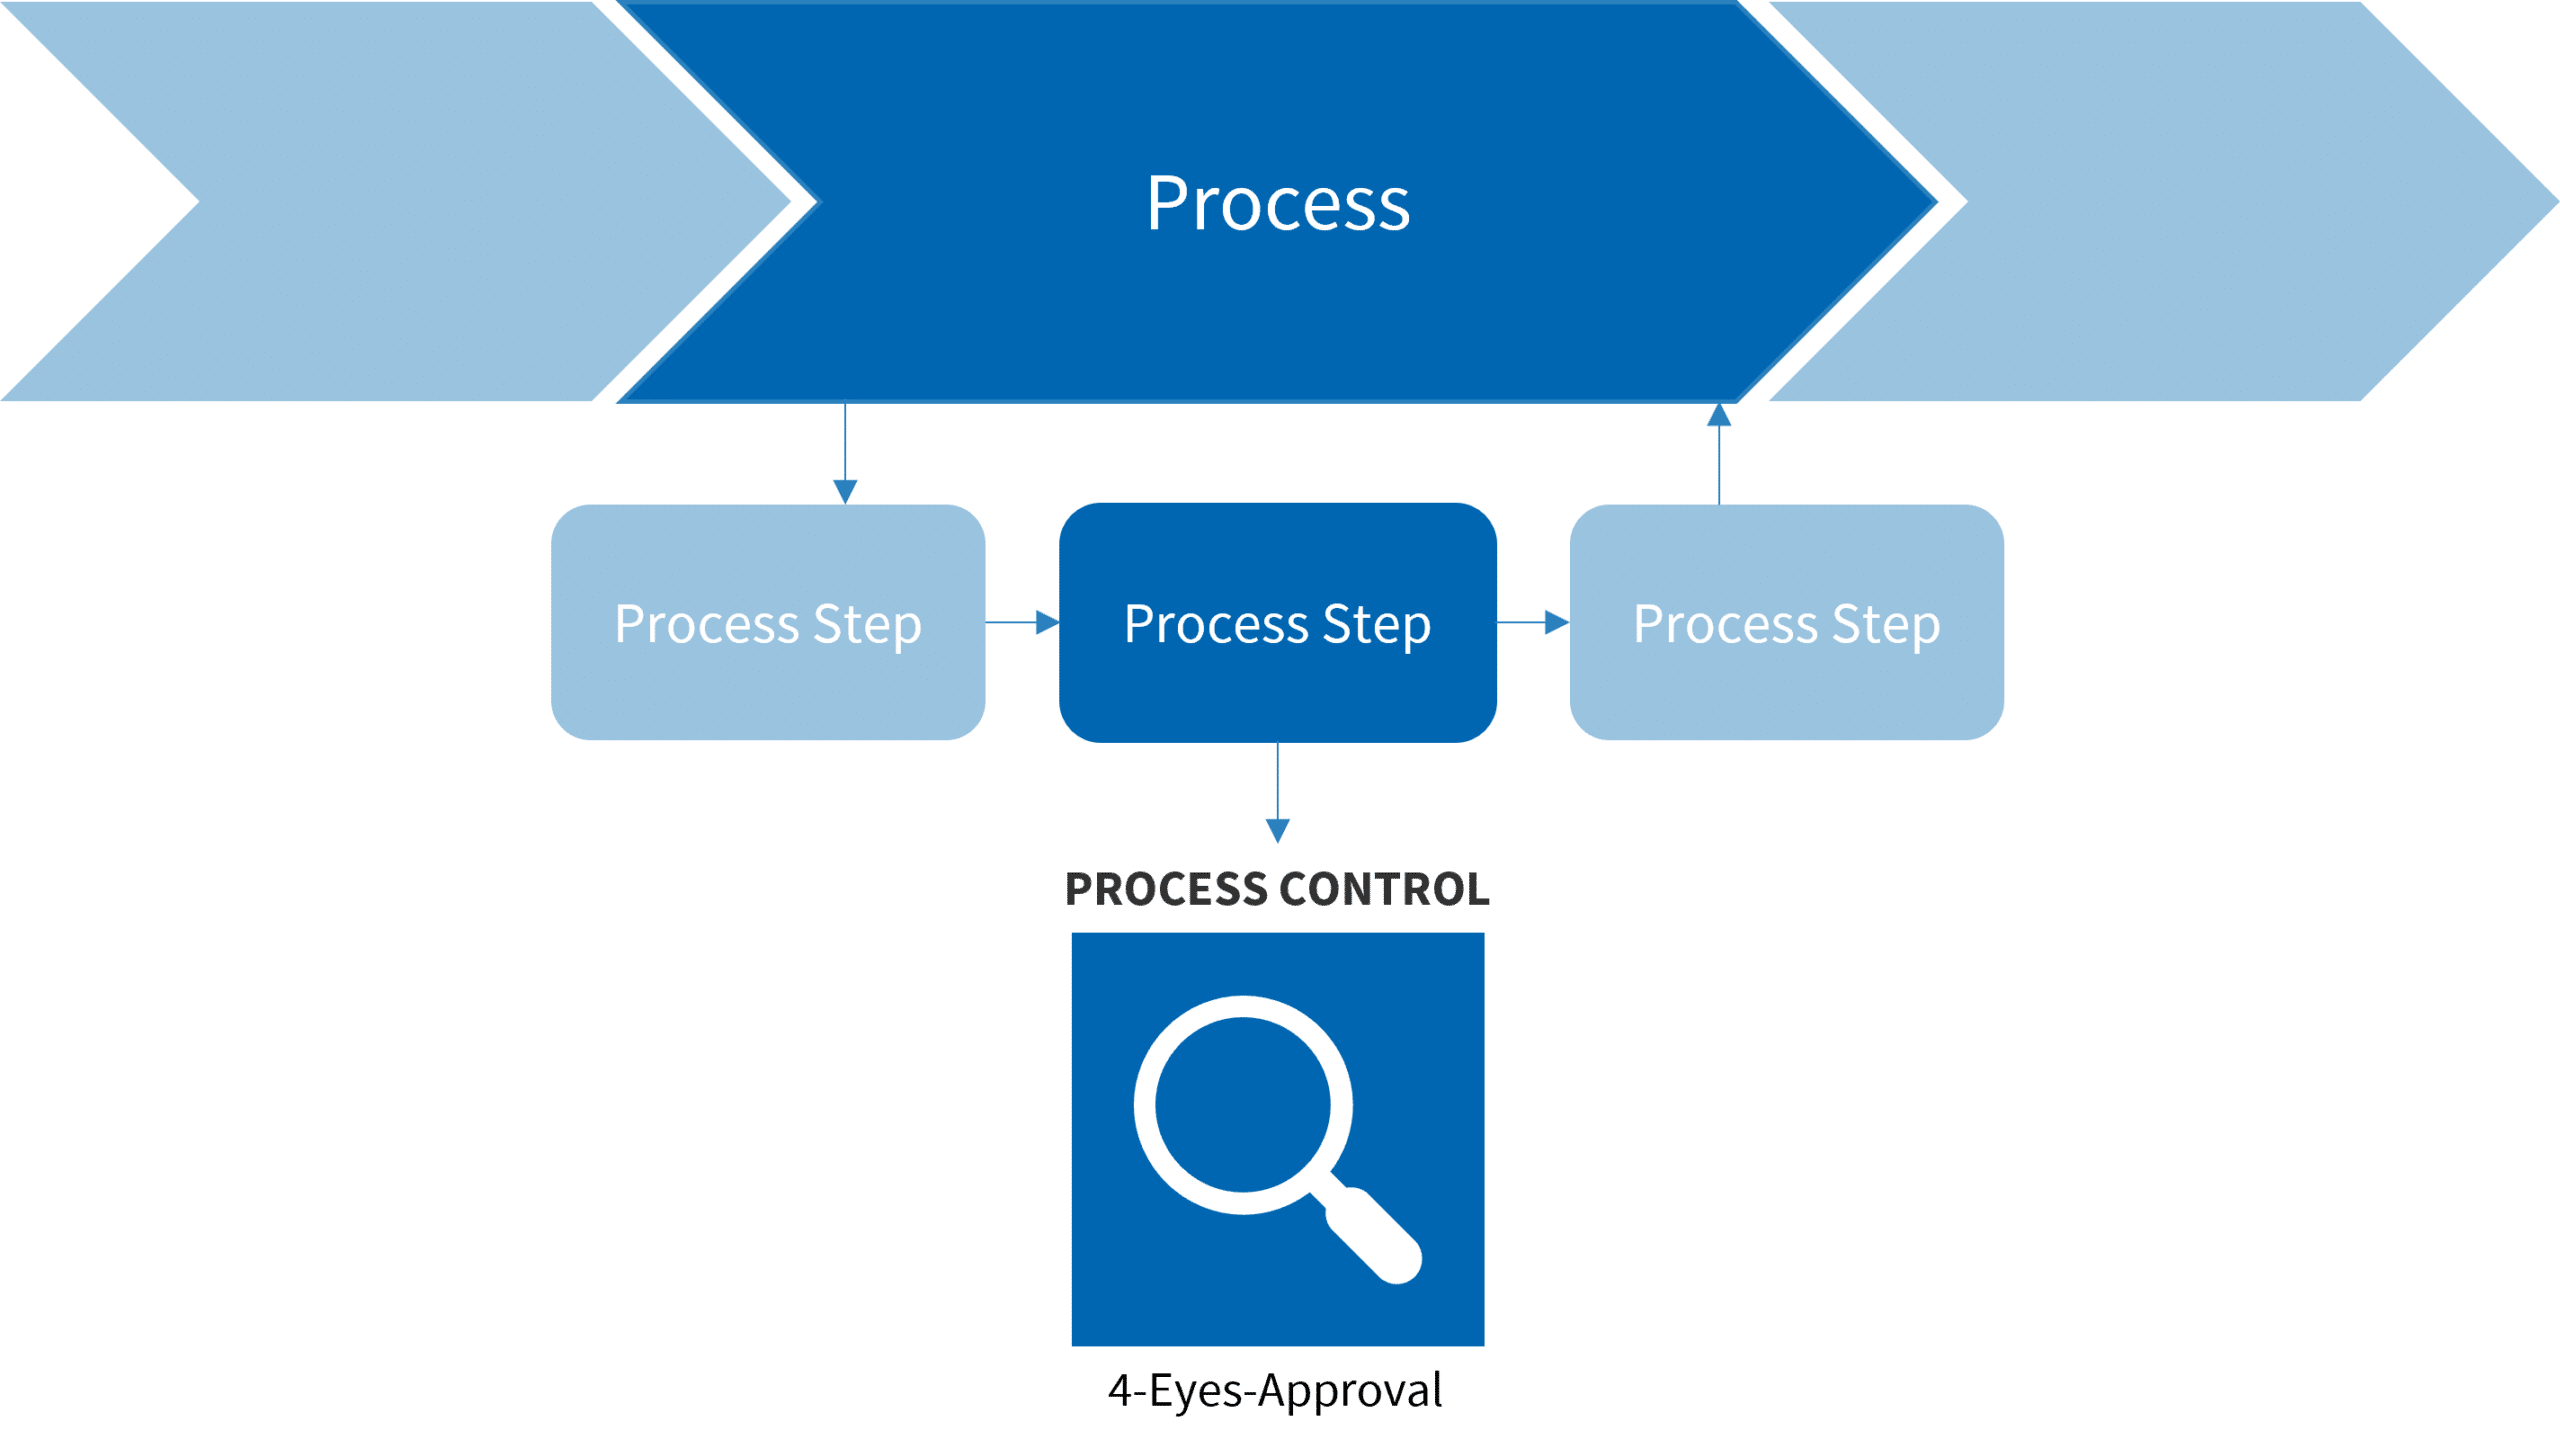 Graphic depicting the quality process control operation